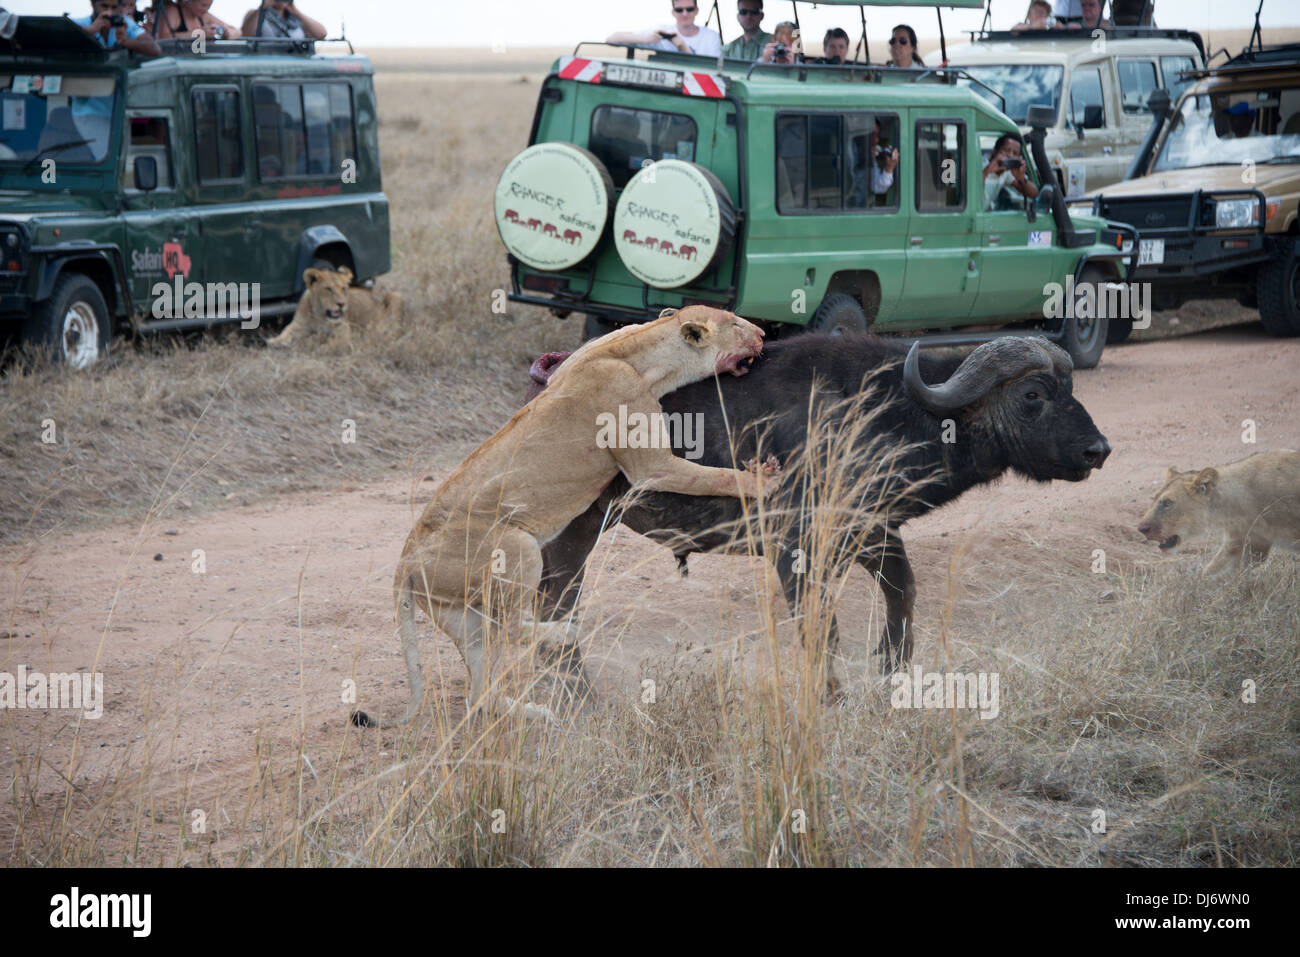 a group of lions attacking and mortally wounding a buffalo while visitors watch in horror Stock Photo